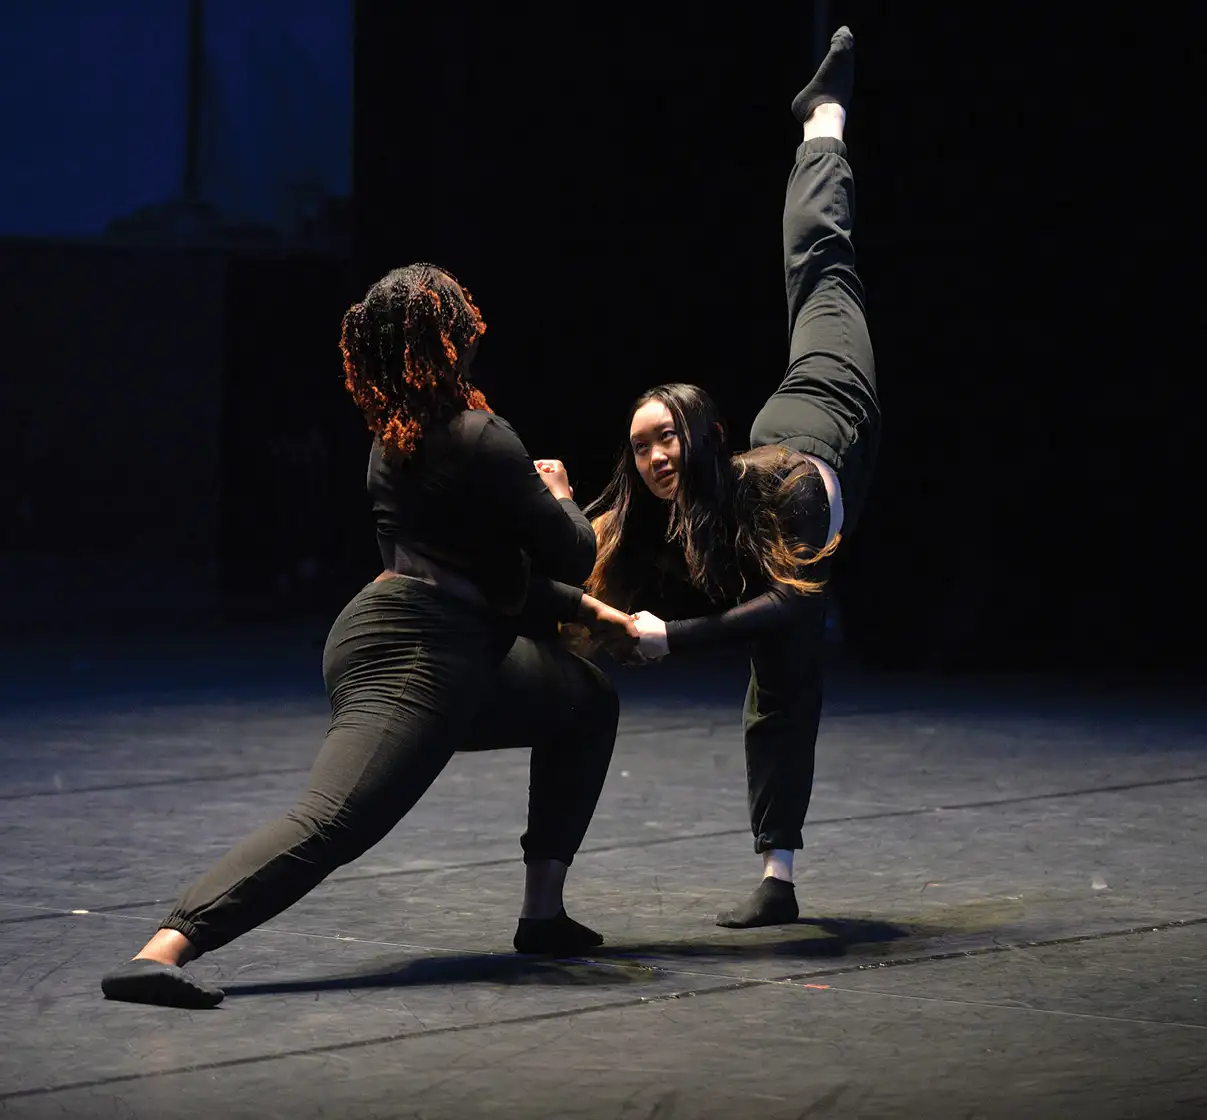 Two students in black uniforms dancing